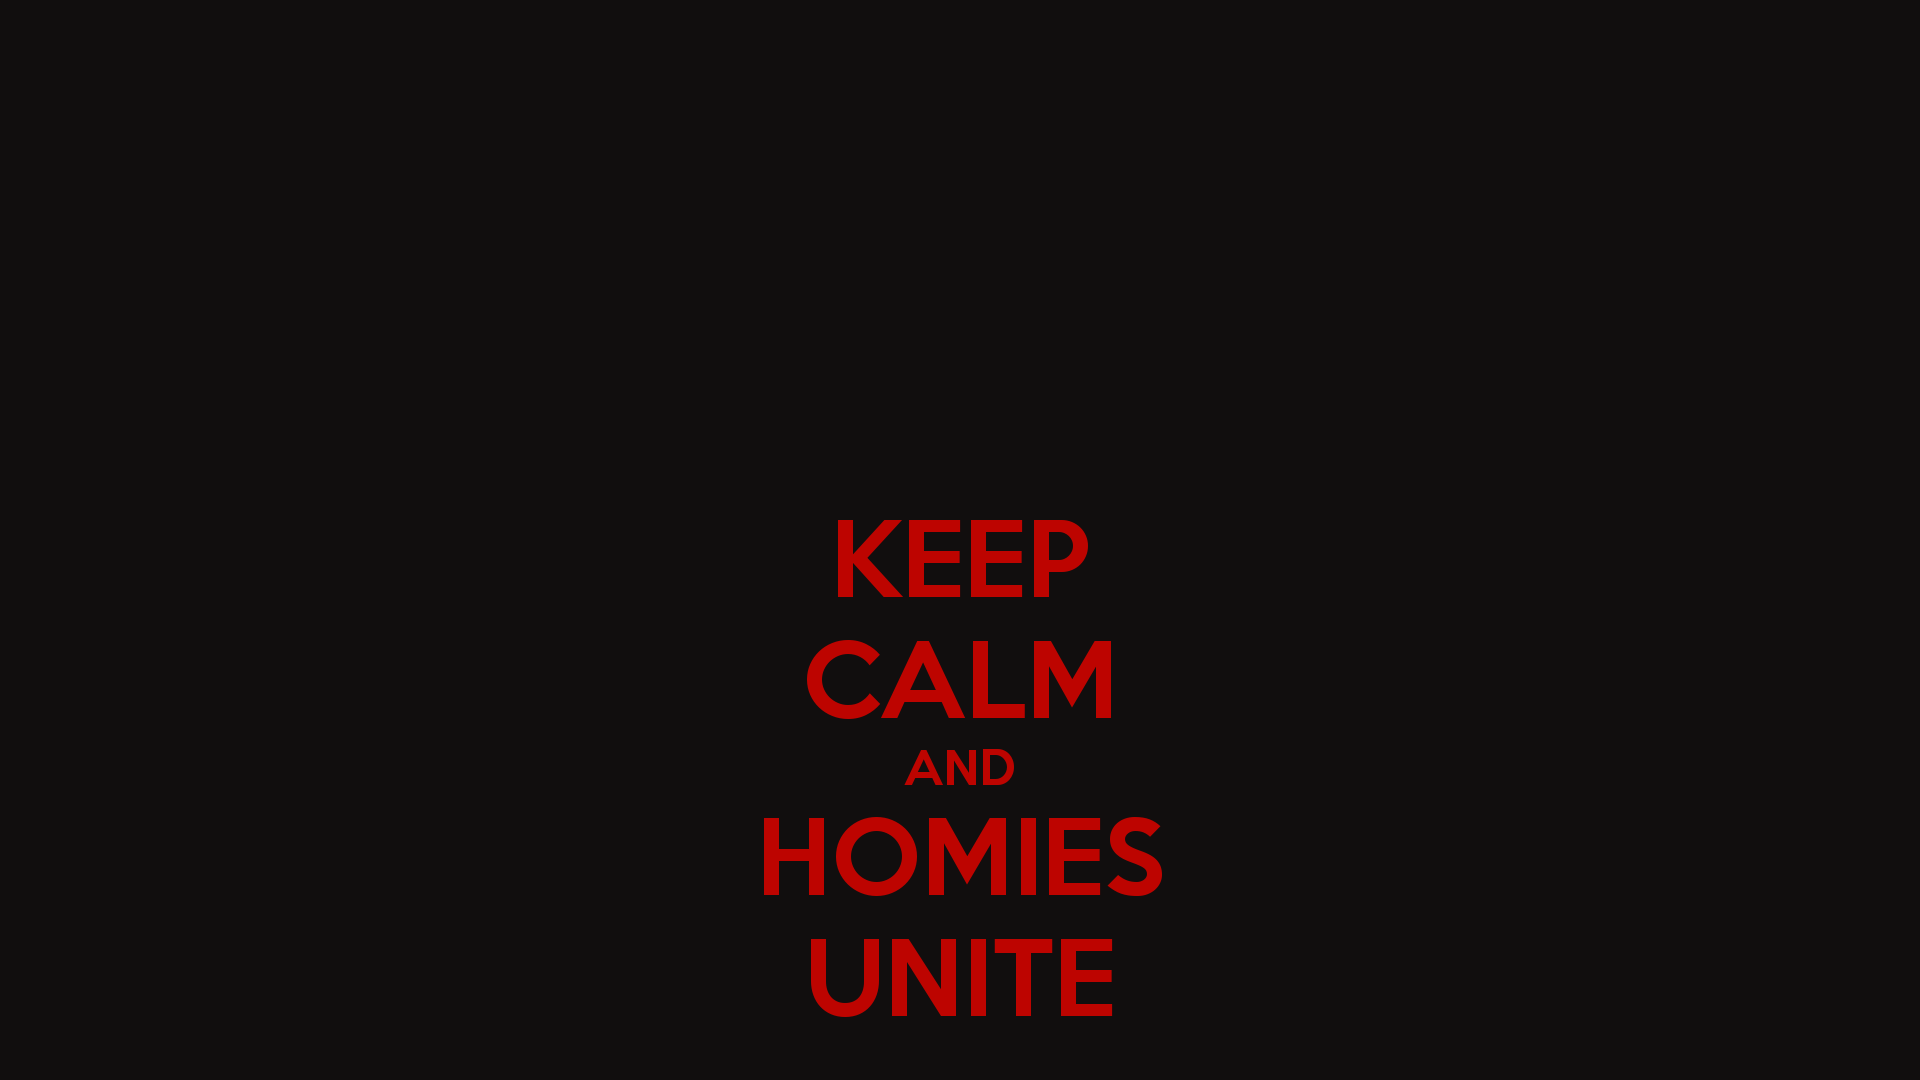 KEEP CALM AND HOMIES UNITE CALM AND CARRY ON Image Generator